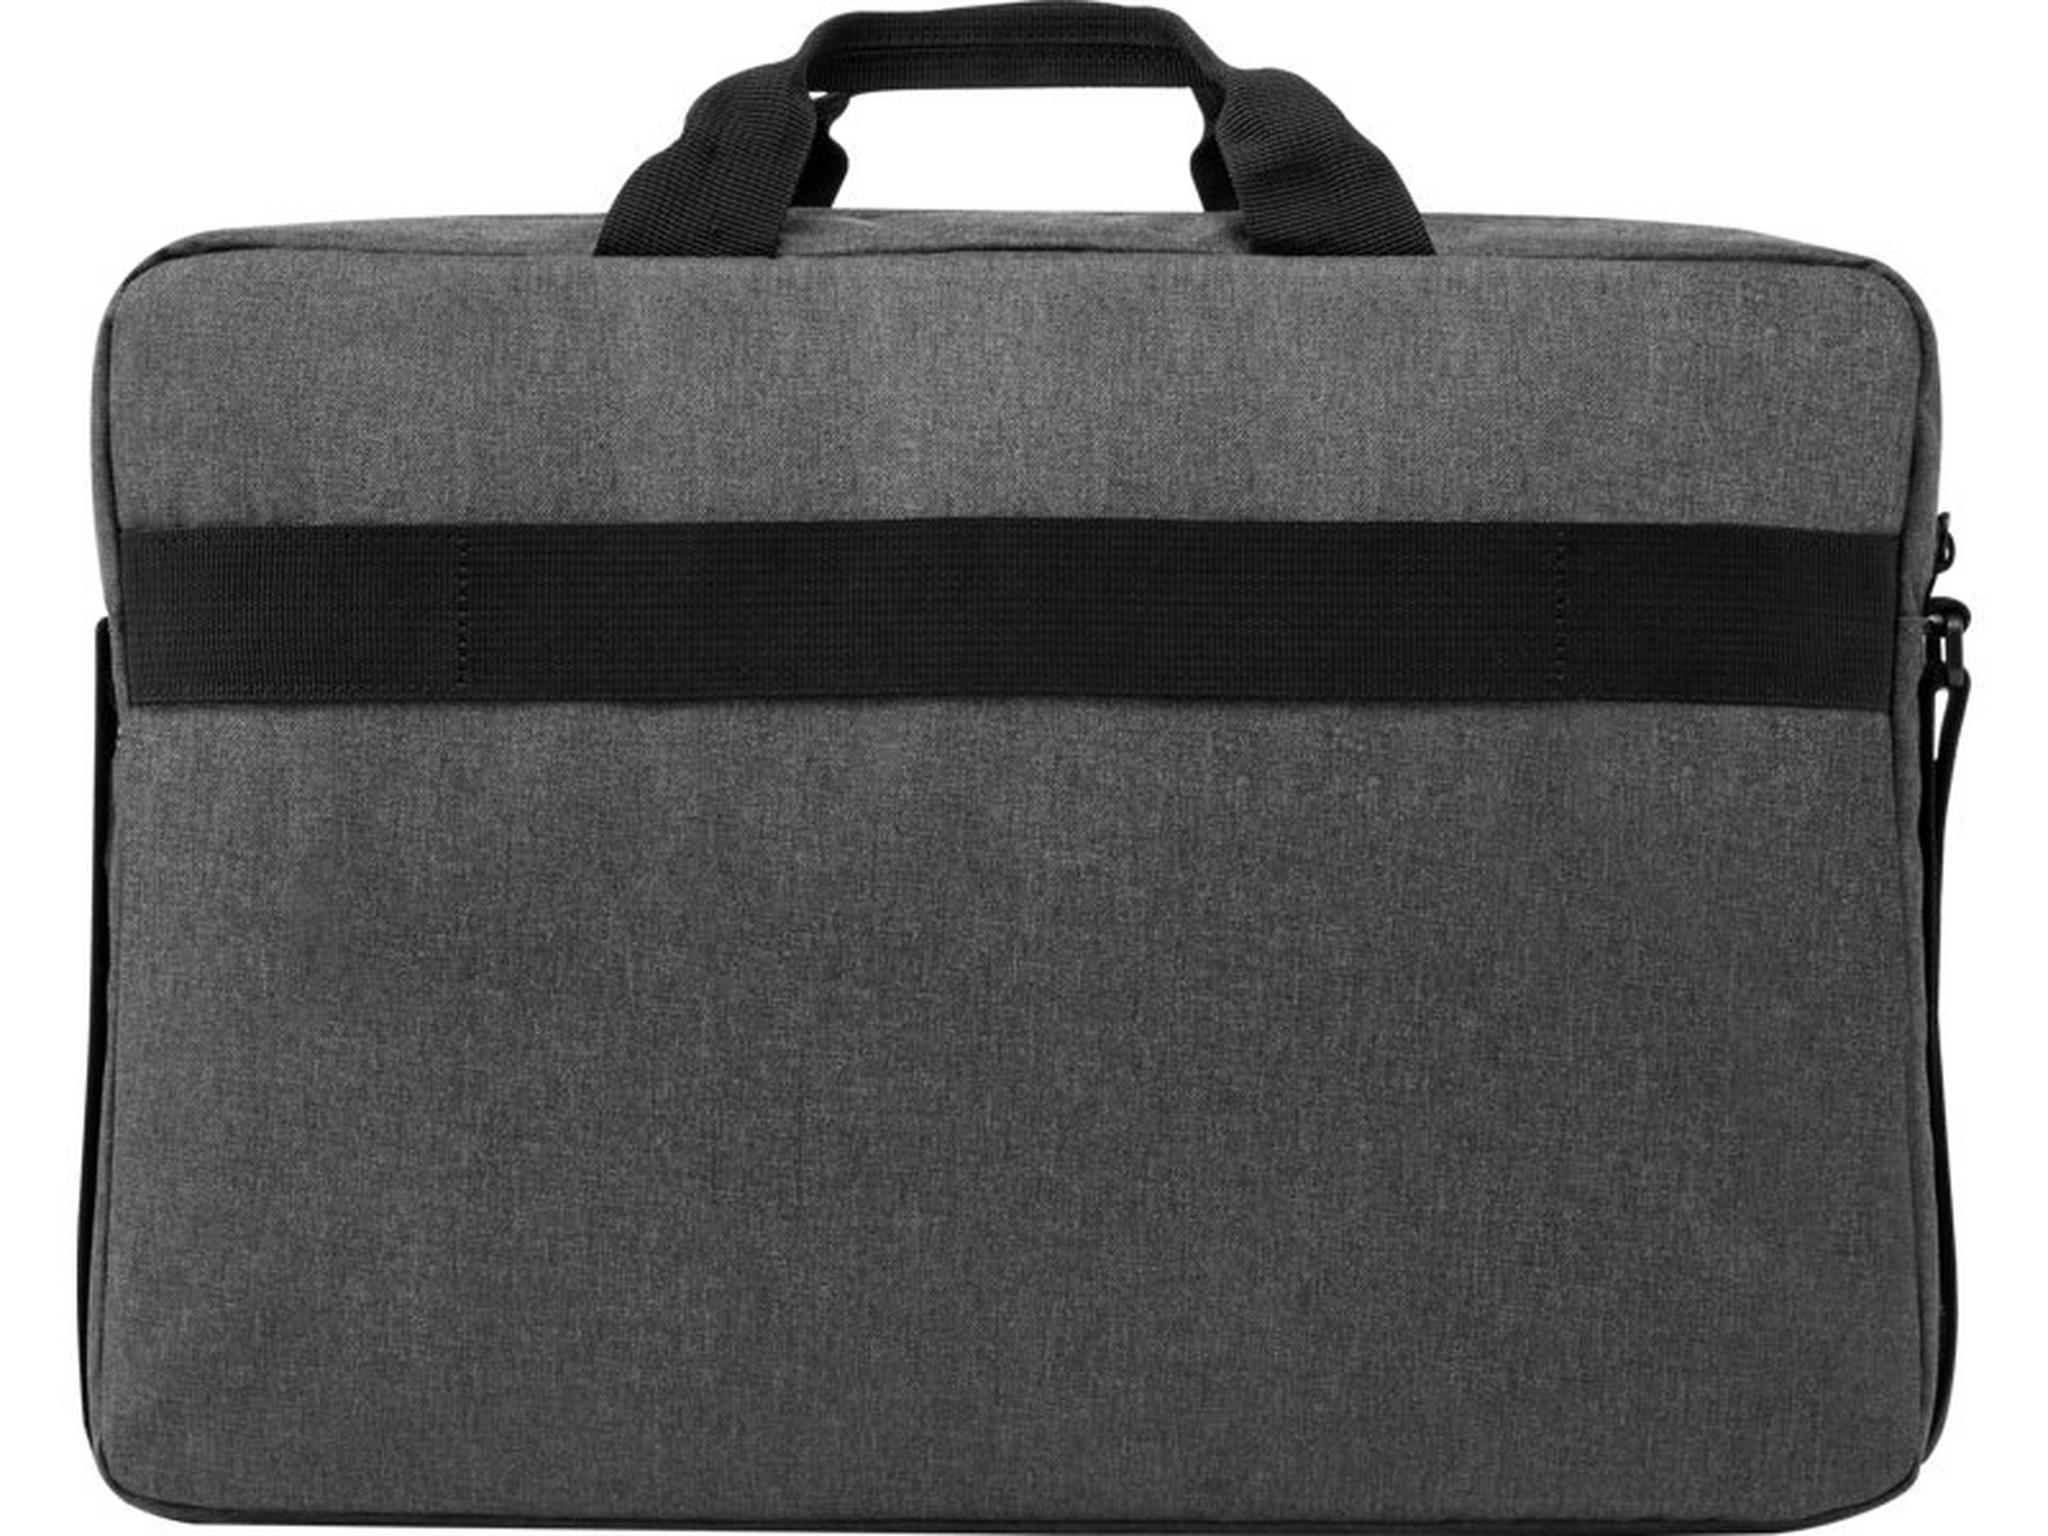 HP Prelude Bag for 17-inch Laptop - Grey